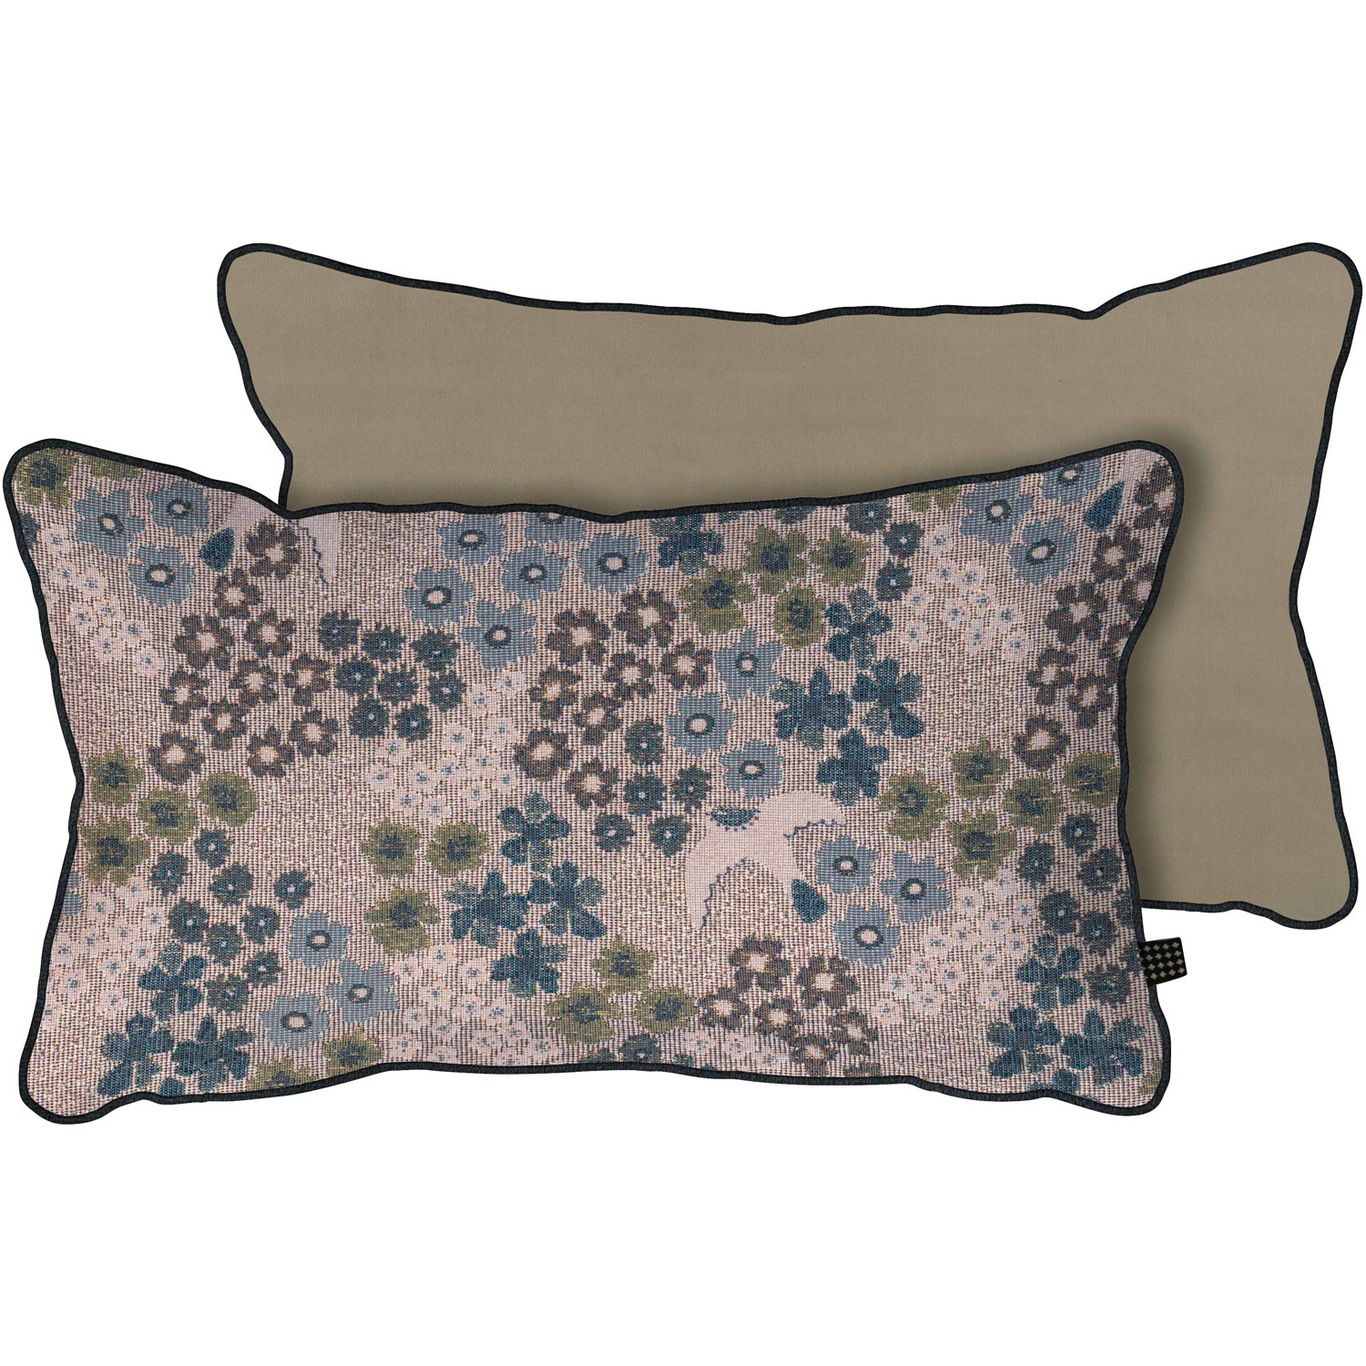 Atelier Cushion 30x50 cm, Shimmering Blooms / Sand